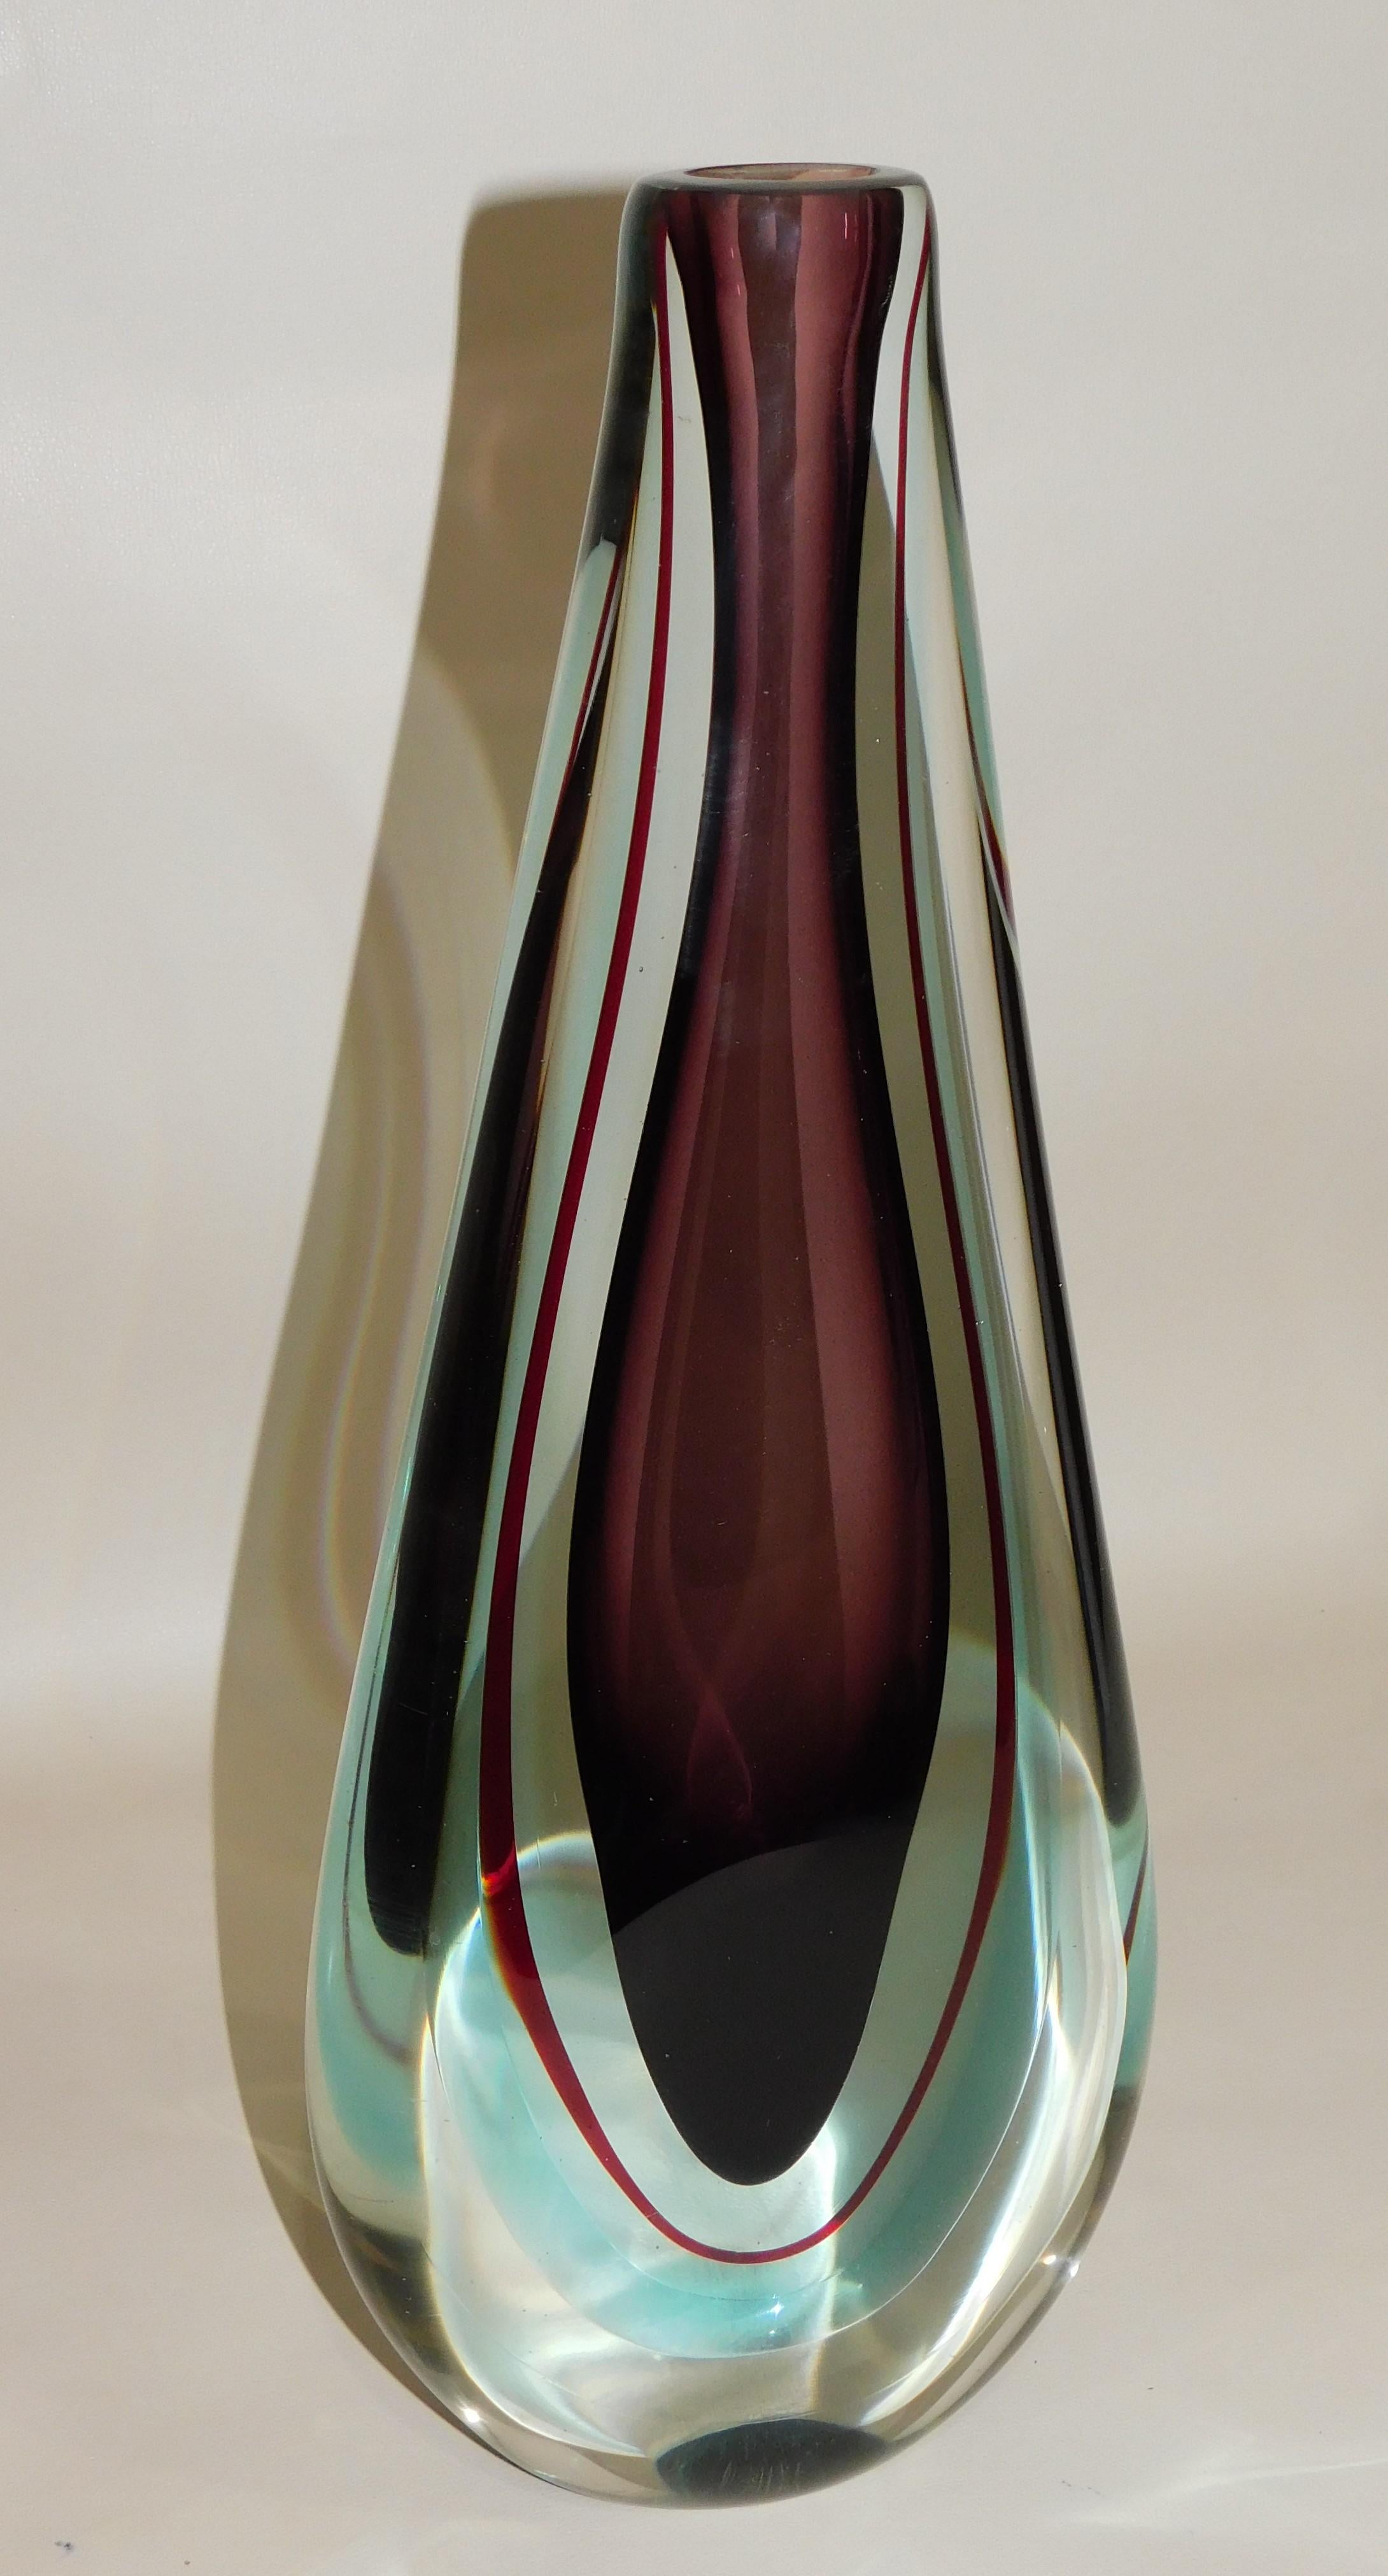 Large and beautiful midcentury Murano Italy hand blown reddish brown and blue/teal toned encased in a thick clear glass overlay art glass flower vase. Attributed to designer Archimede Seguso, circa 1960. Measures: 16.5 inches high.